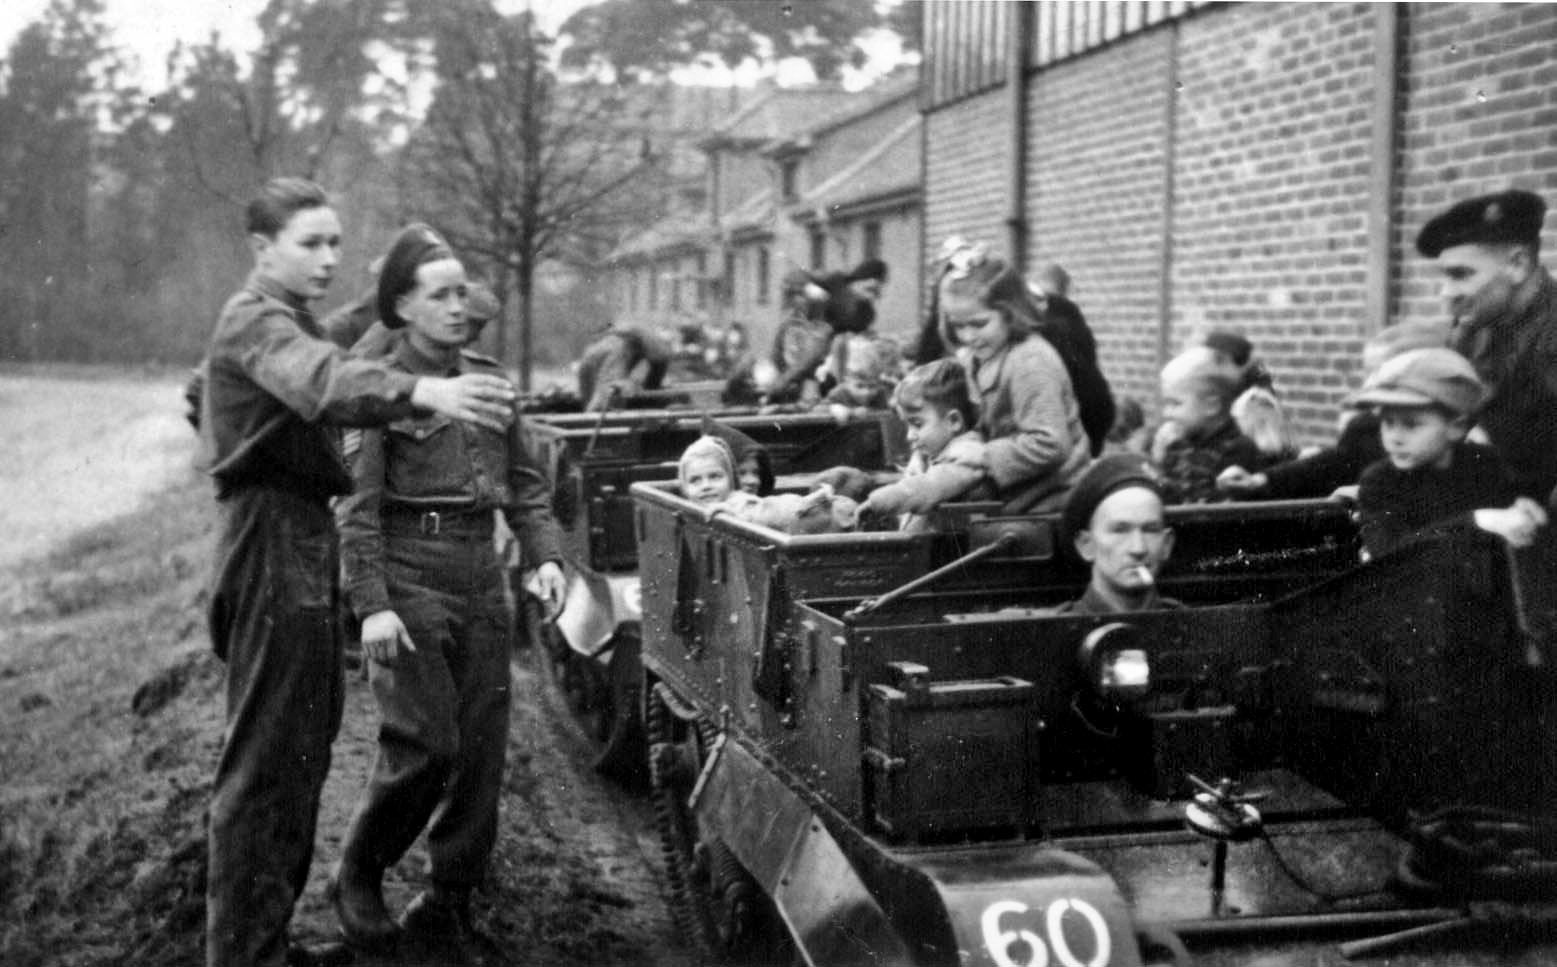 As the war was winding down, Gunther, who was fluent in English, went to work as a translator for the British occupation forces. Here he (left) directs the loading of German children into British Bren carriers at Soltau during “Fraternization Day” with members of the Hampshire Regiment.